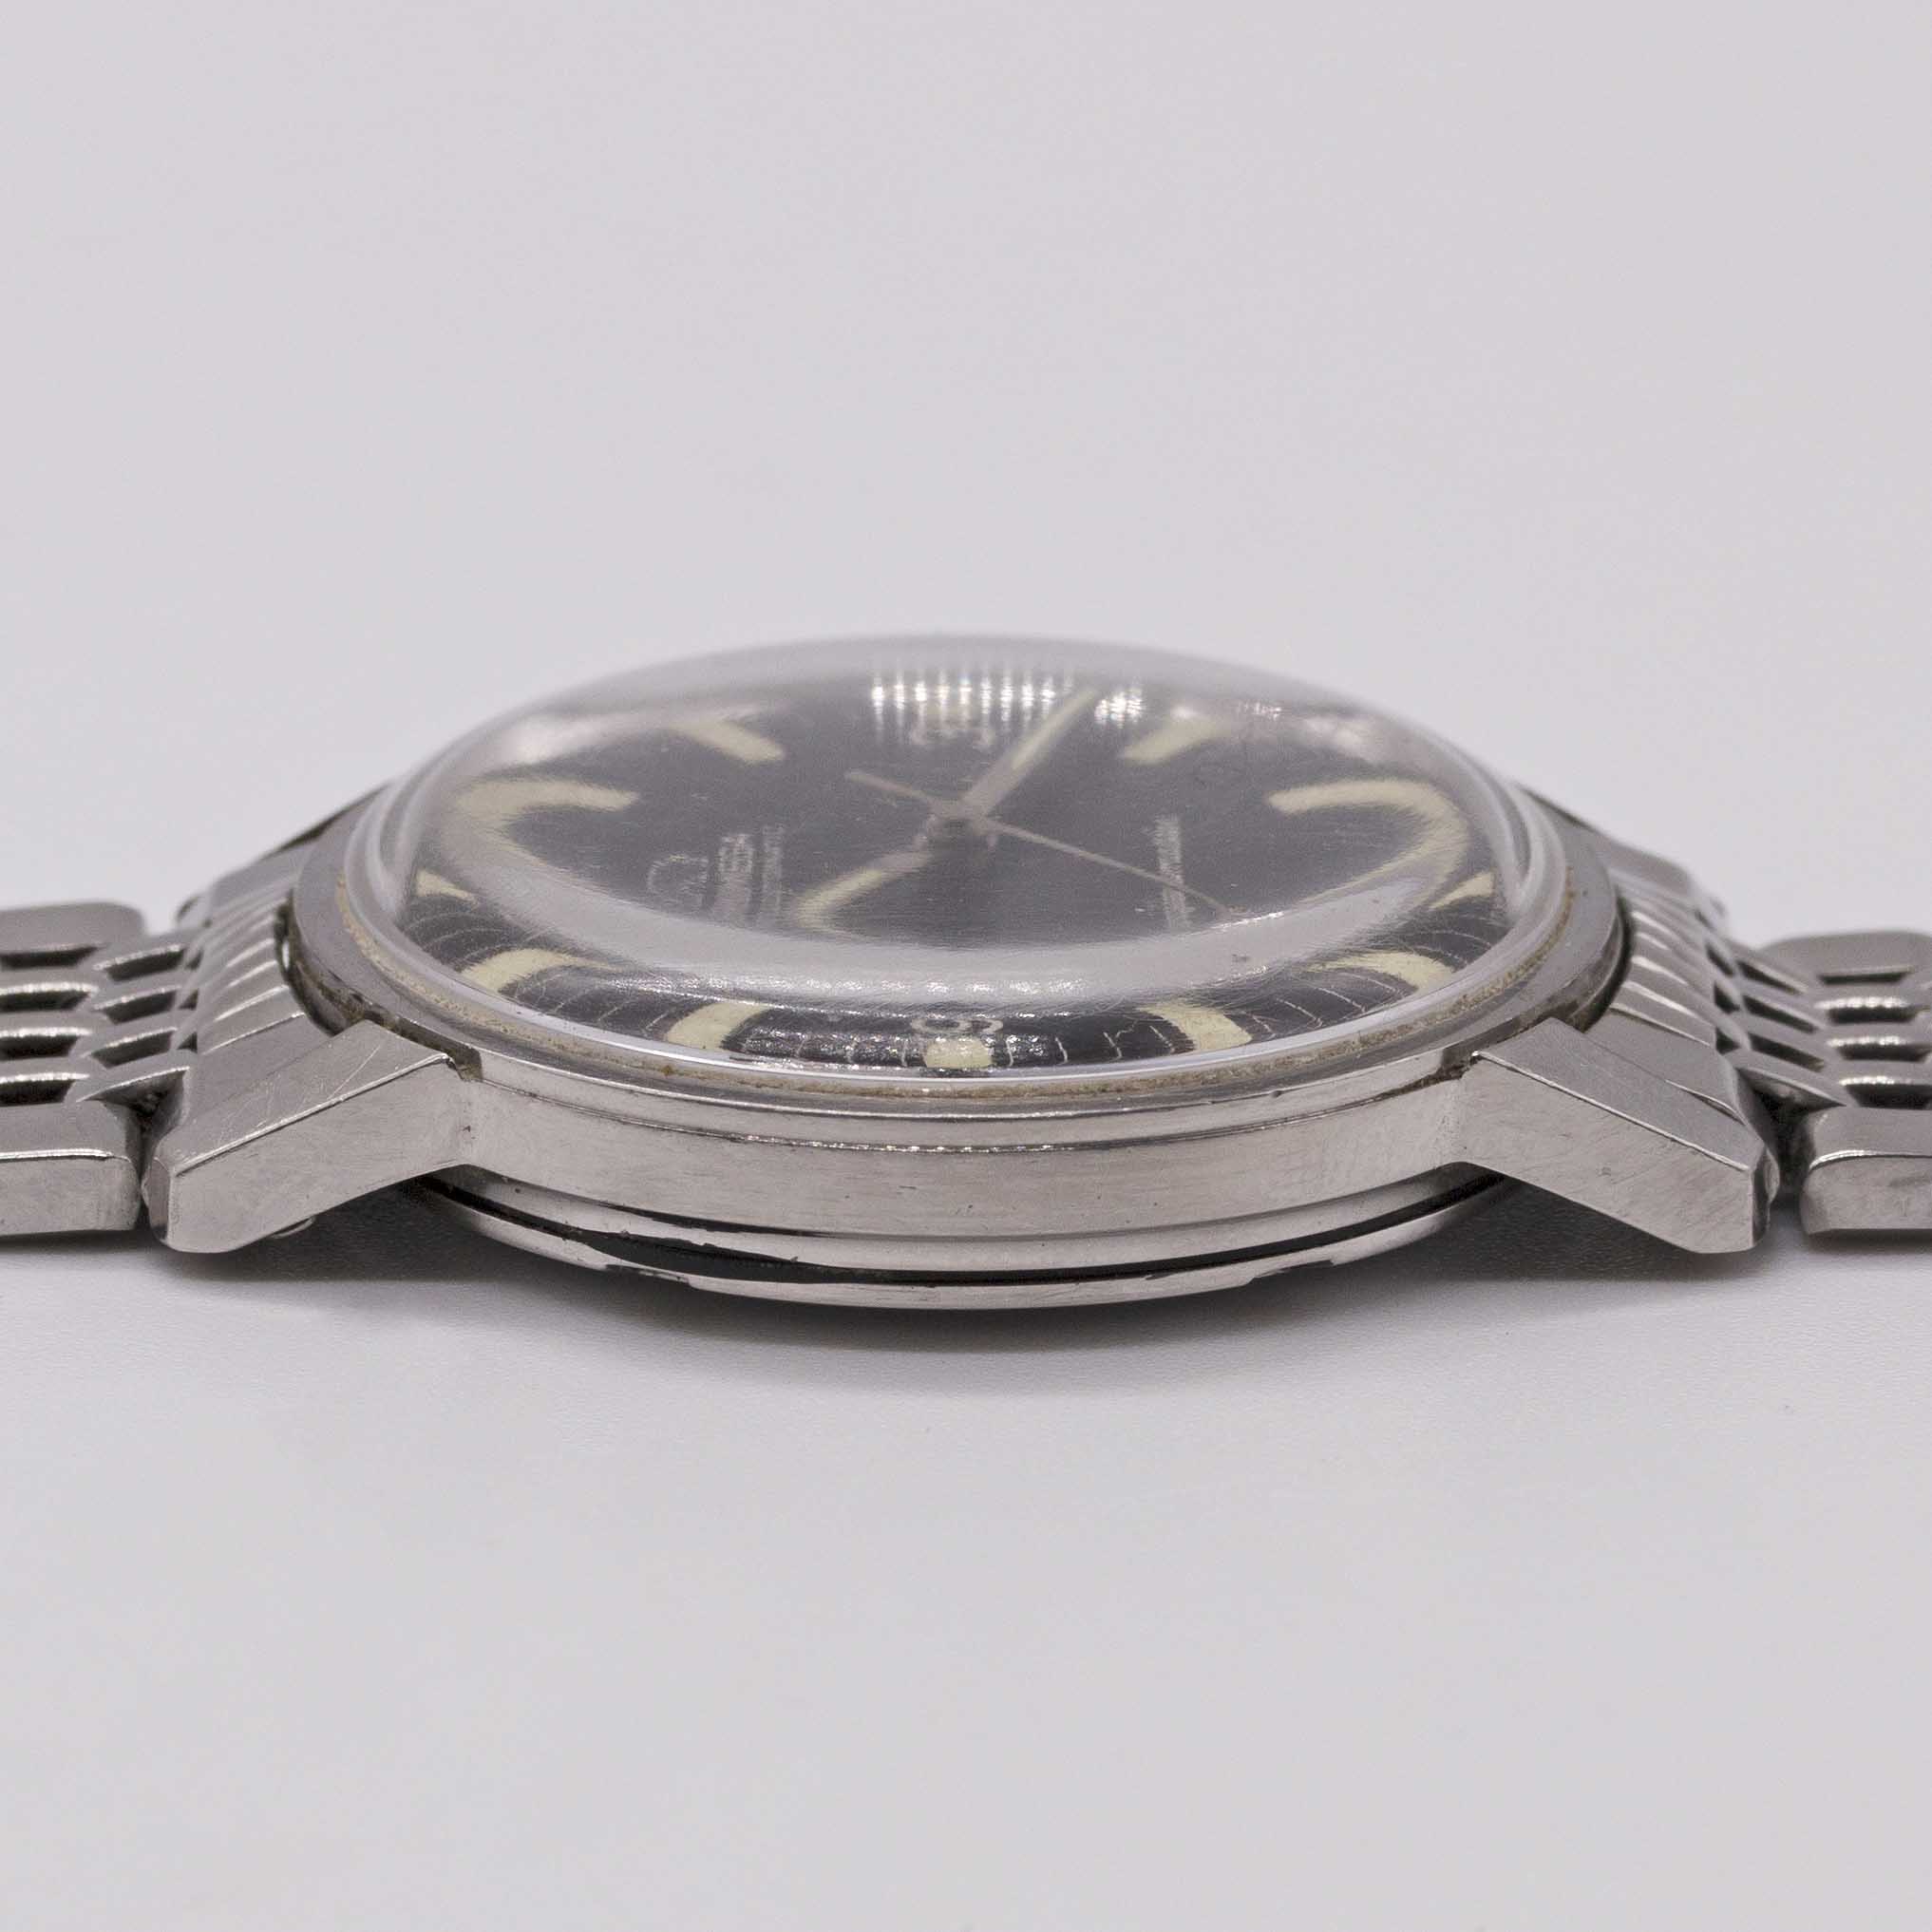 A GENTLEMAN'S STAINLESS STEEL OMEGA SEAMASTER AUTOMATIC BRACELET WATCH CIRCA 1967, REF. 165.002 WITH - Image 9 of 9